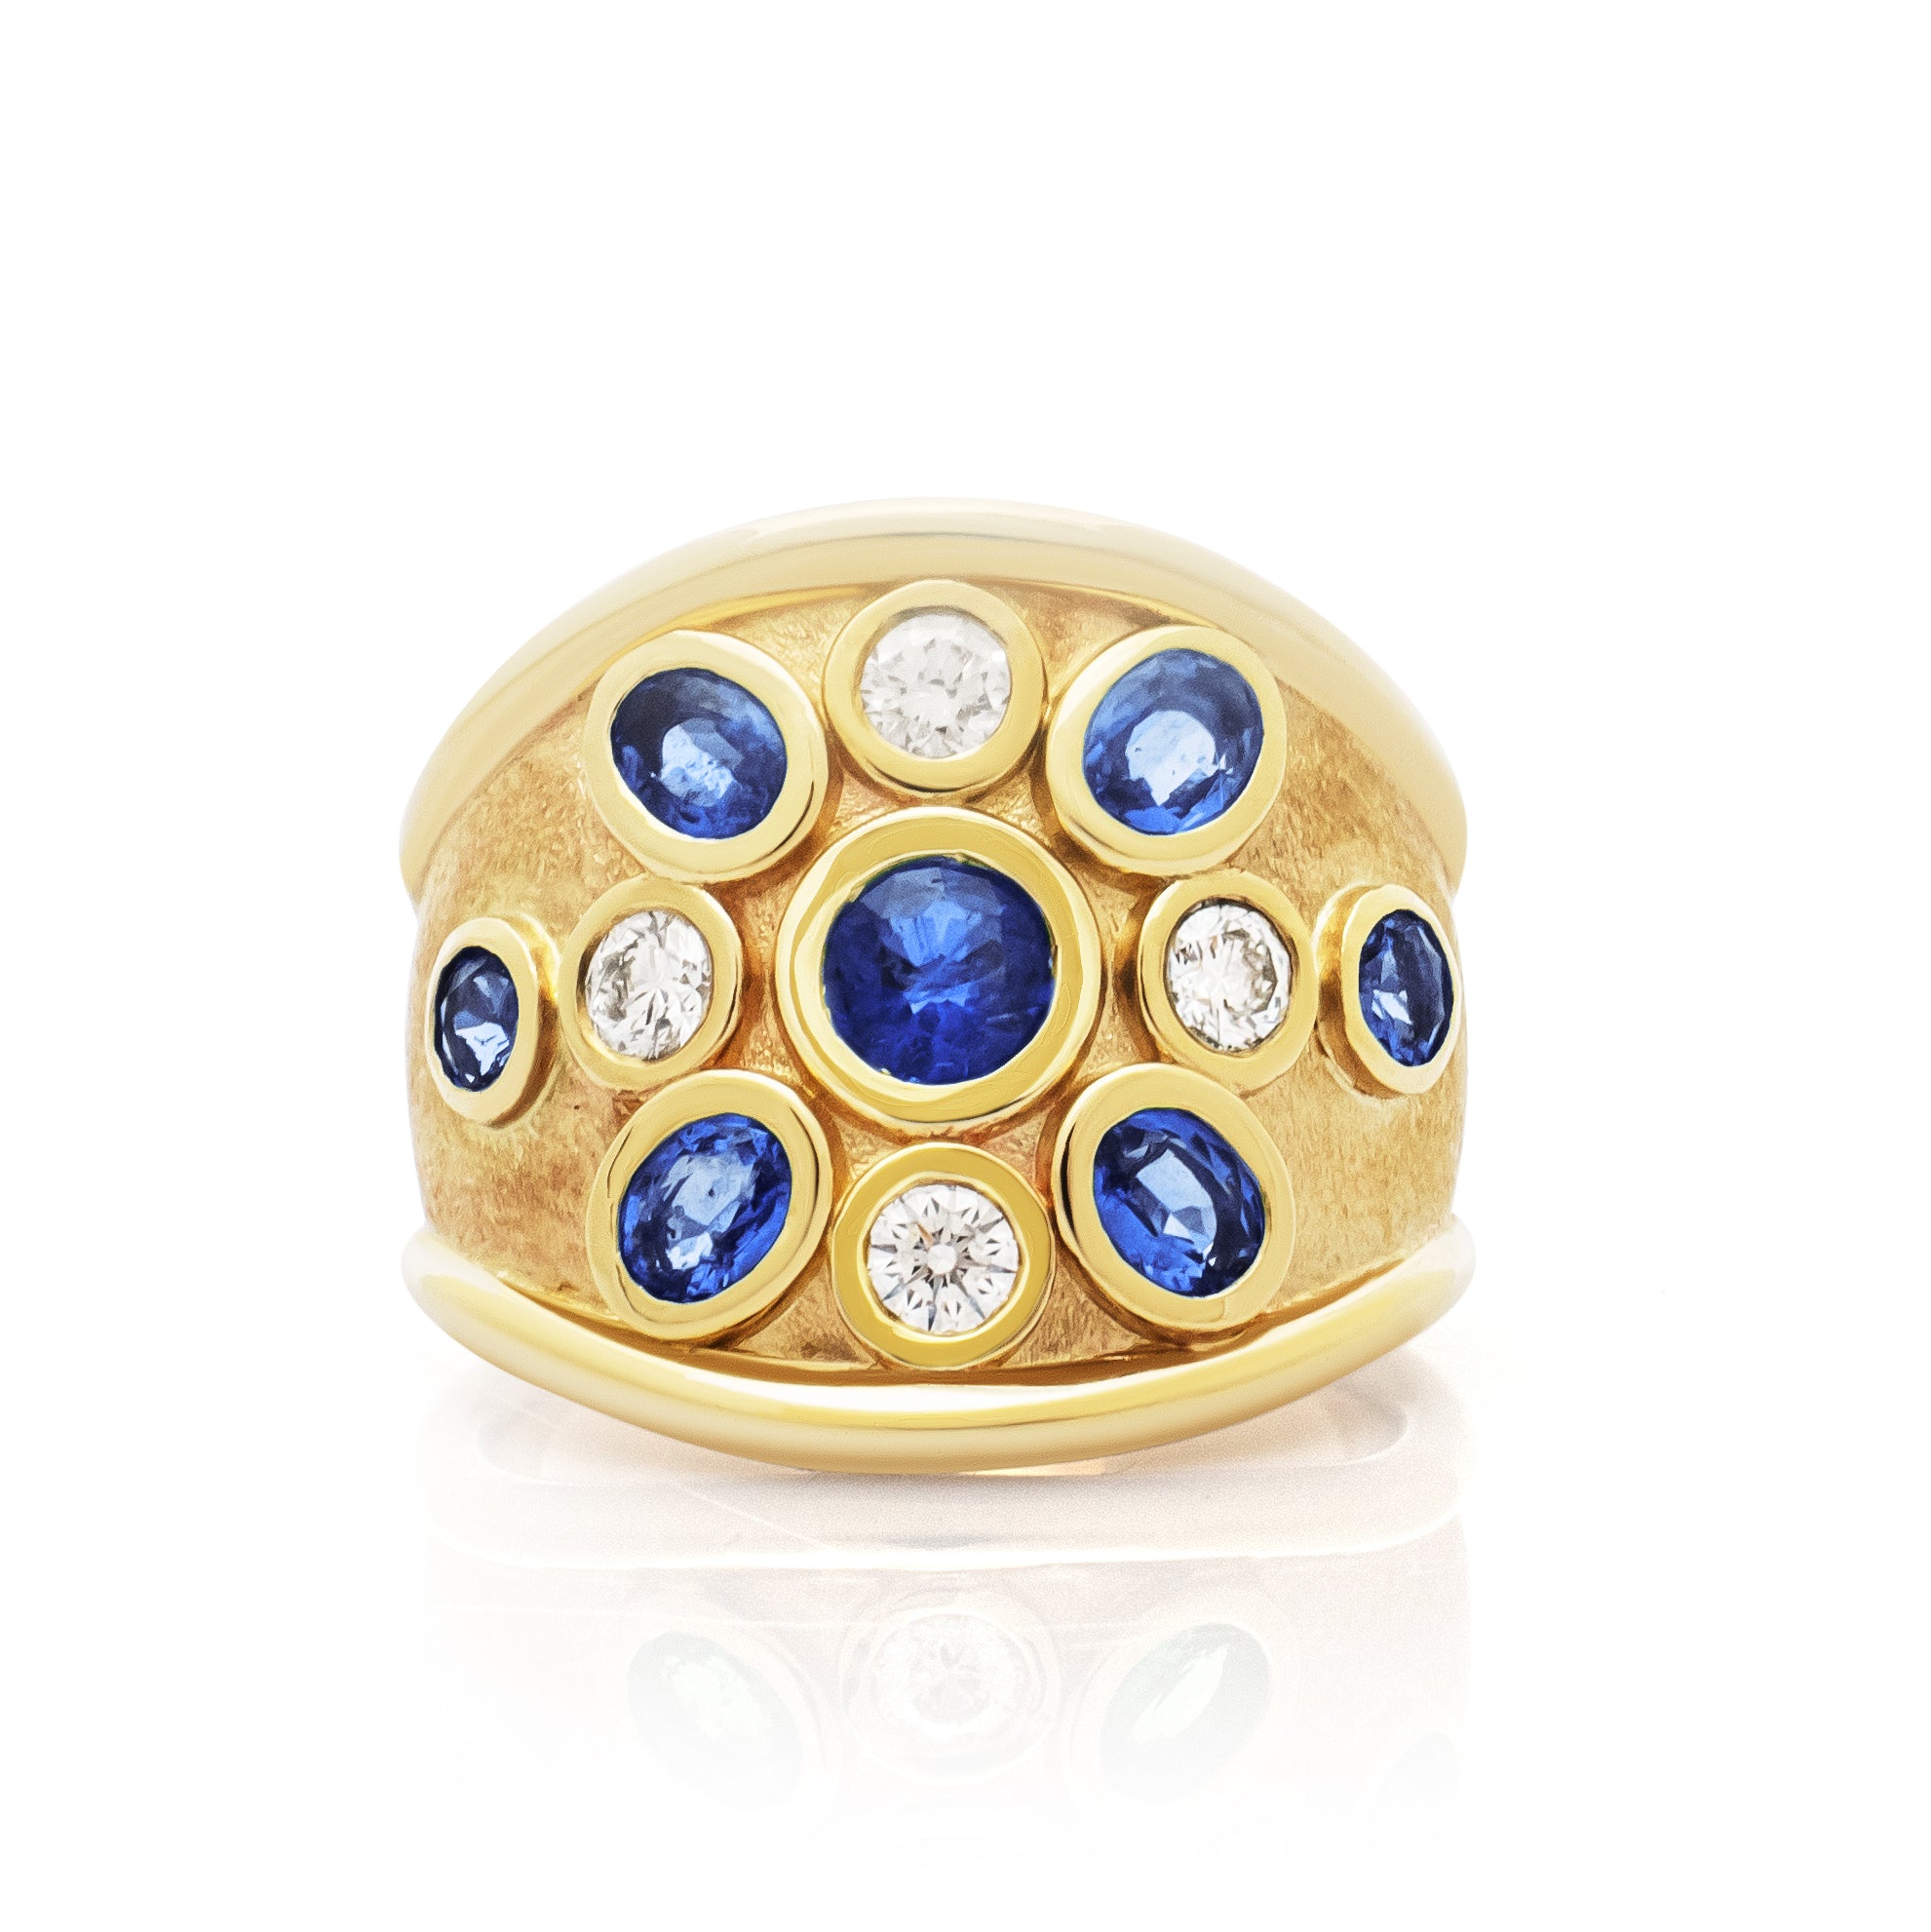 Sapphire and Diamond Droplet Ring. Sapphire and Diamond ring. Solid gold ring. Sapphire and diamond jewellery. Elizabethan style ring. 